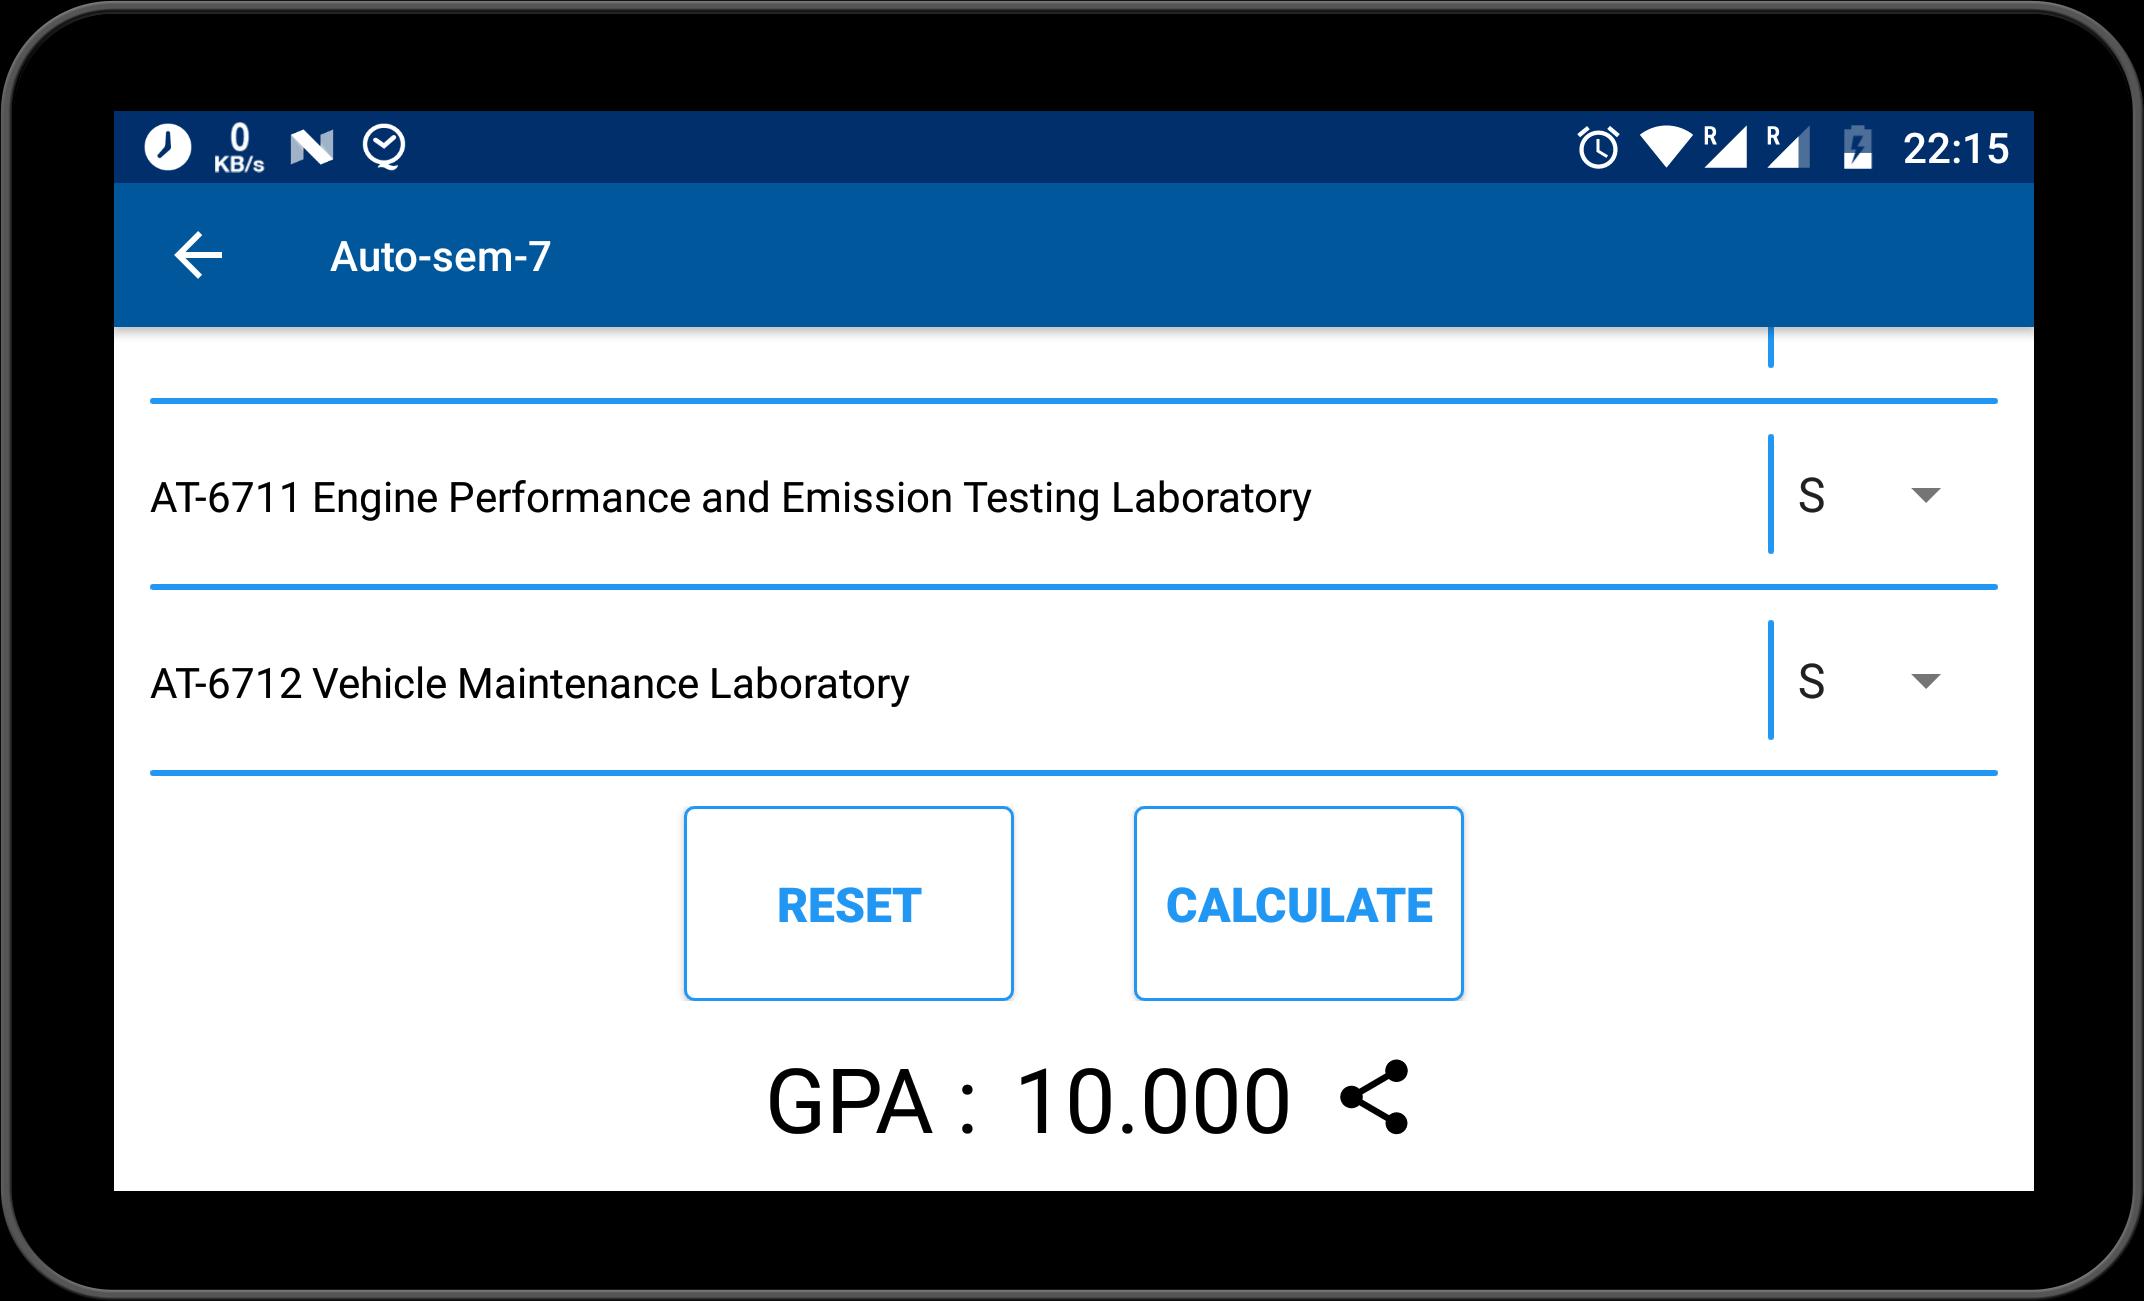 Anna university gpa calculator software free download avg cleaner pro cracked apk free download